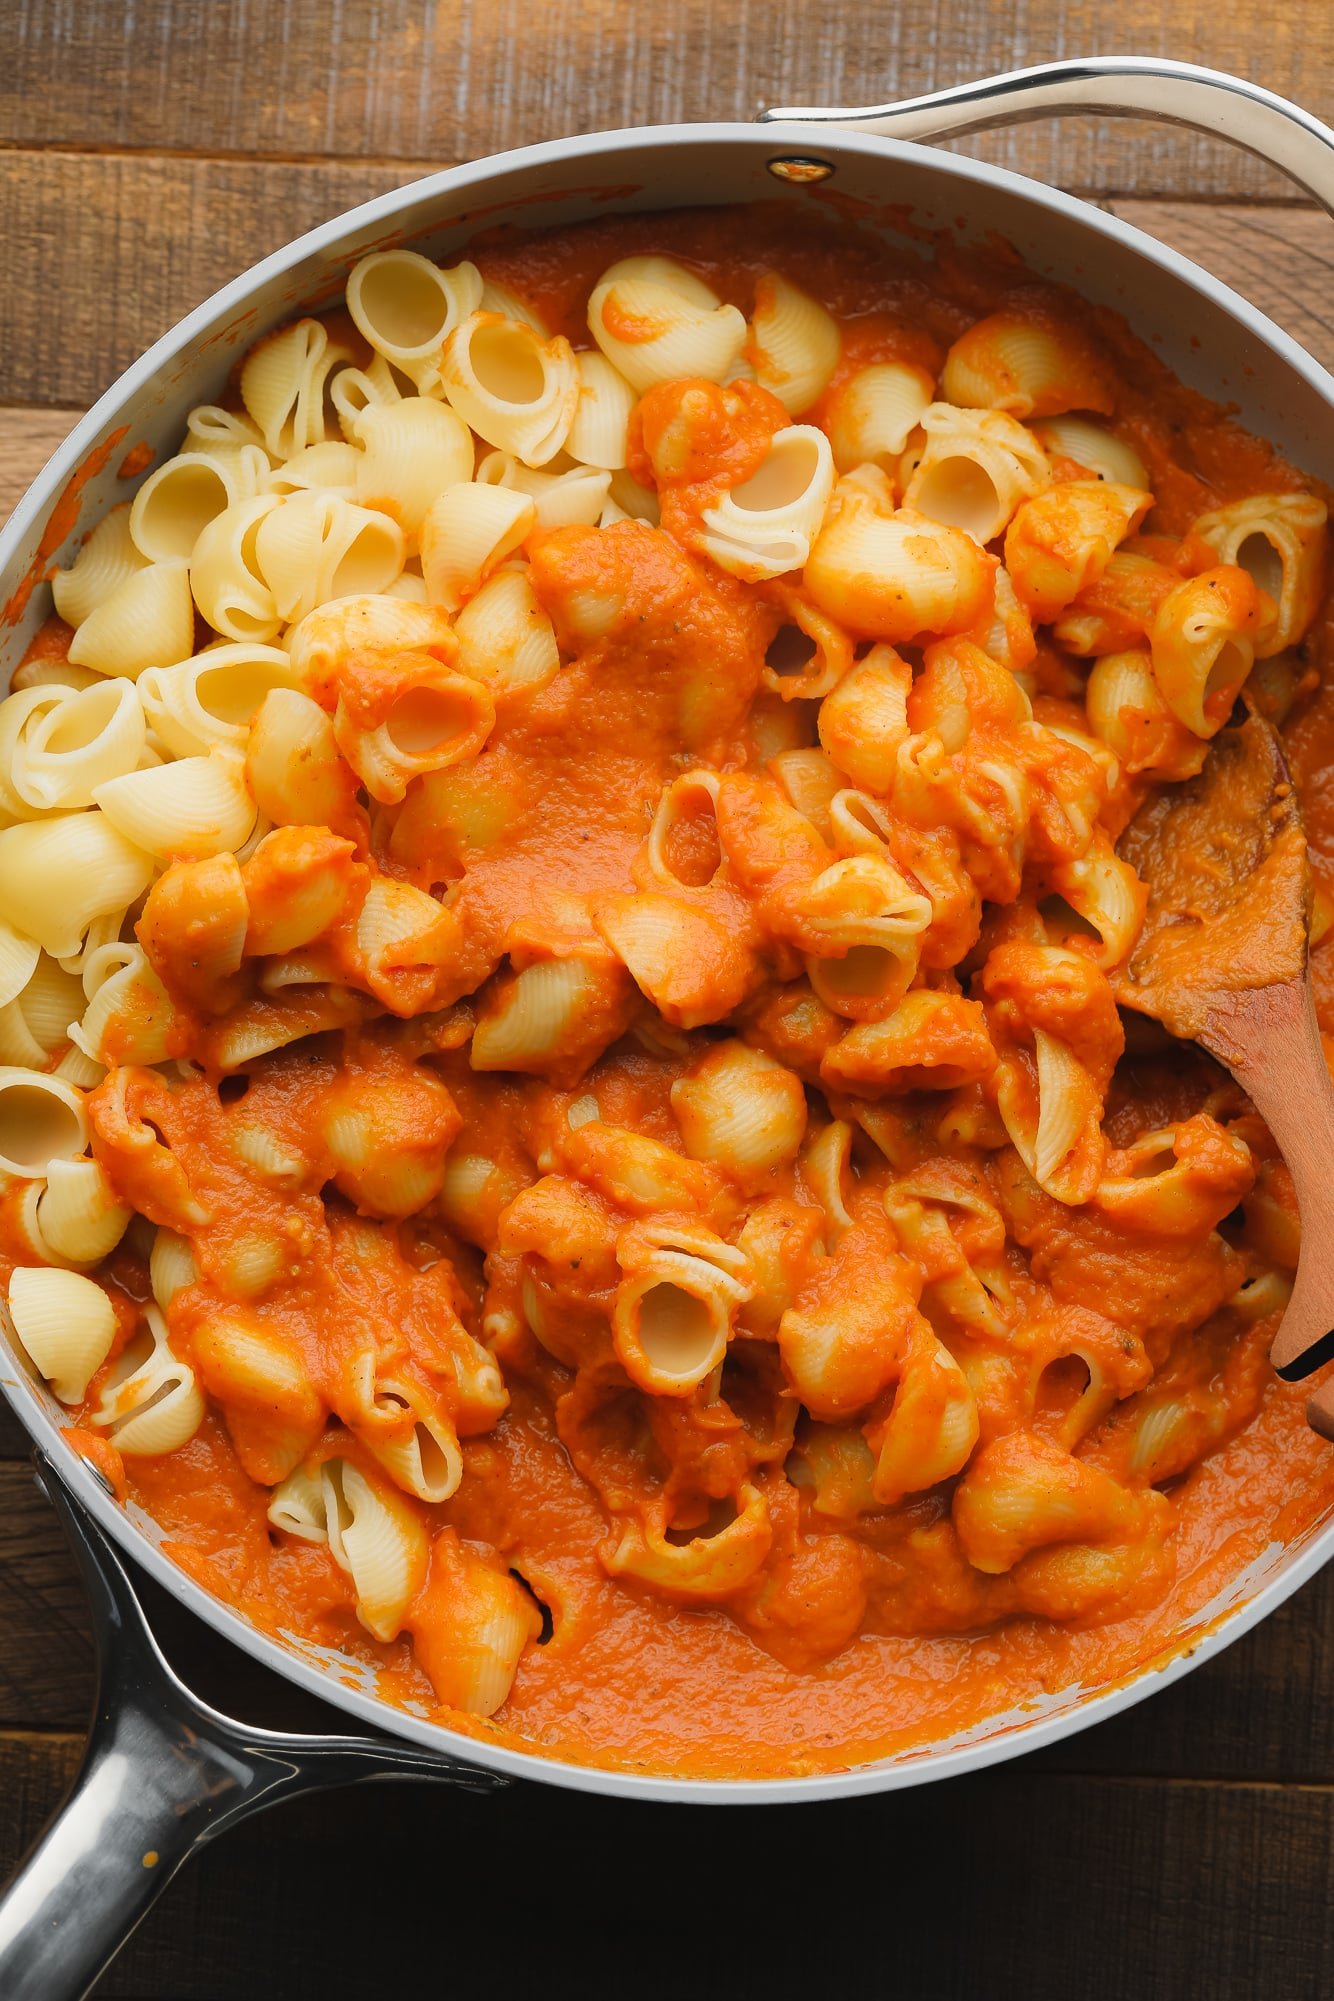 Stirring cooked pasta noodles into a skillet with pumpkin pasta sauce.